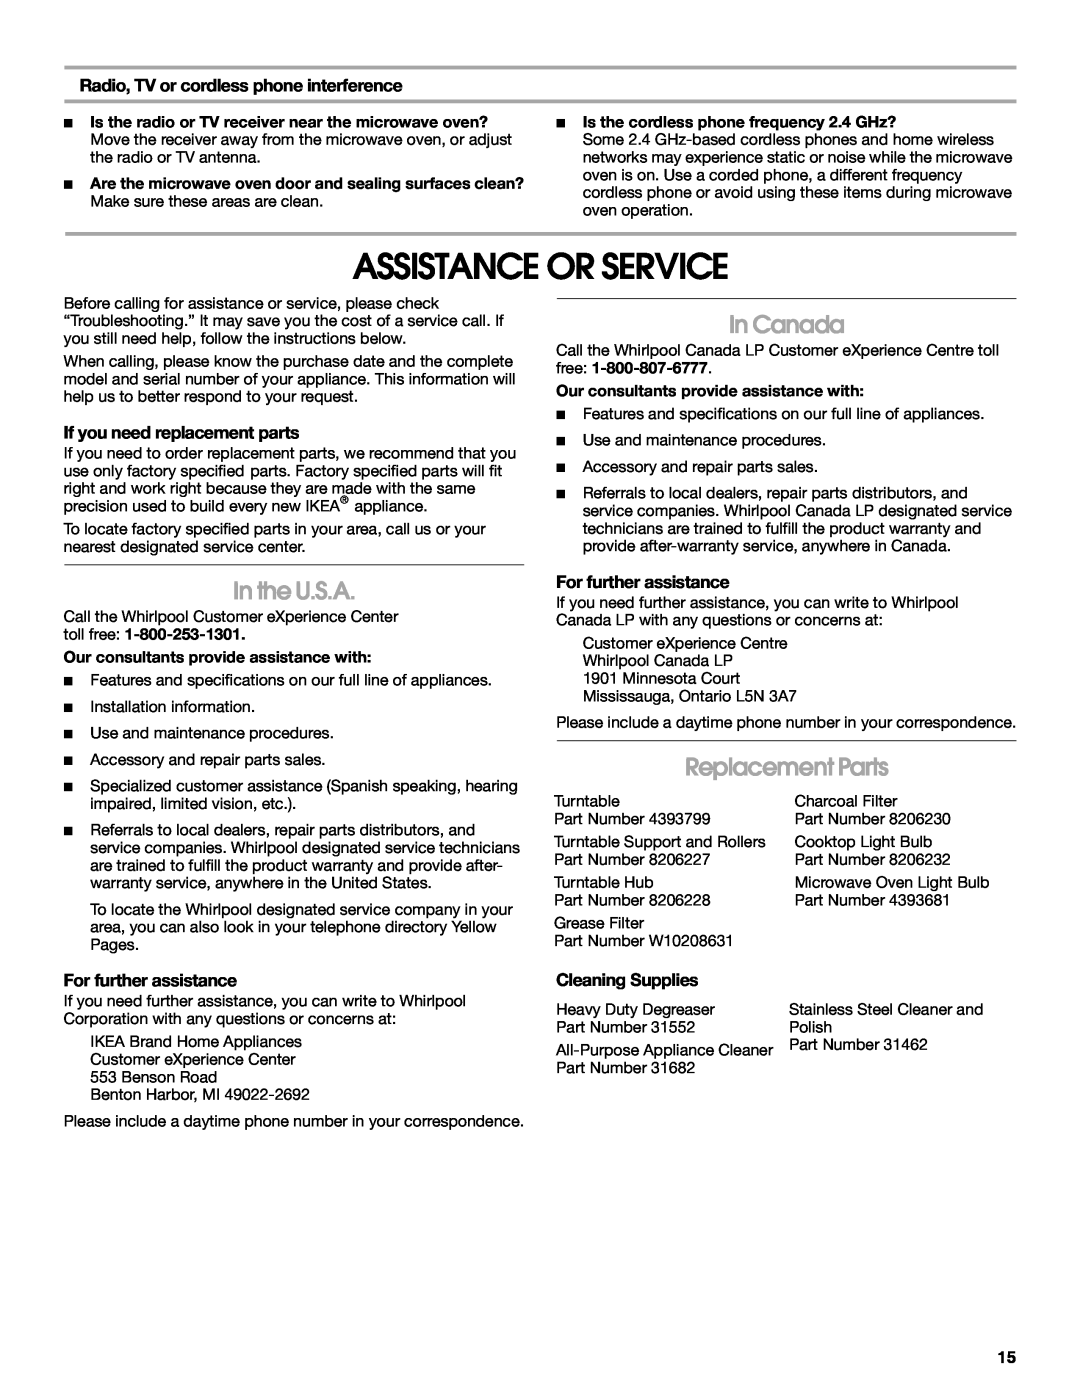 IKEA IMH15 Assistance Or Service, In Canada, In the U.S.A, Replacement Parts, Radio, TV or cordless phone interference 